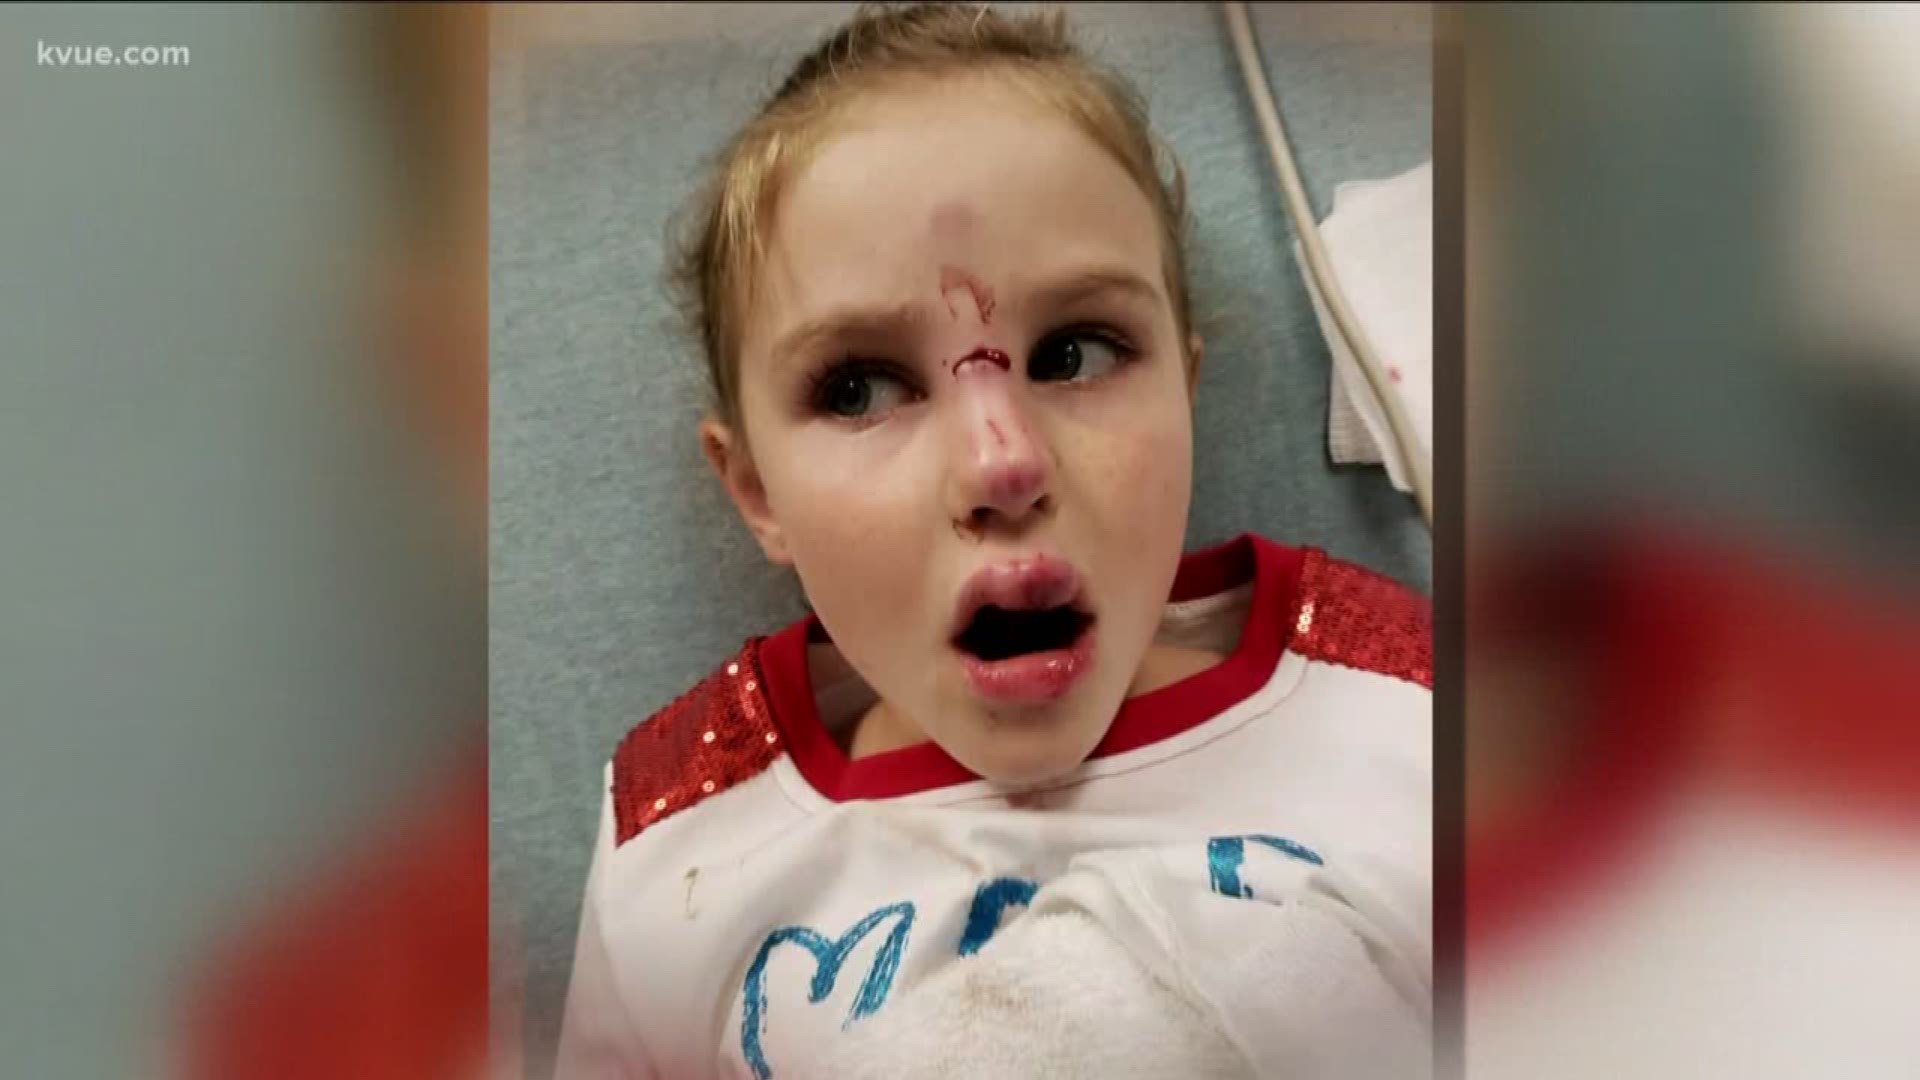 A seven-year-old Georgetown girl is recovering after a dog attacked her face, sending her to the emergency room.